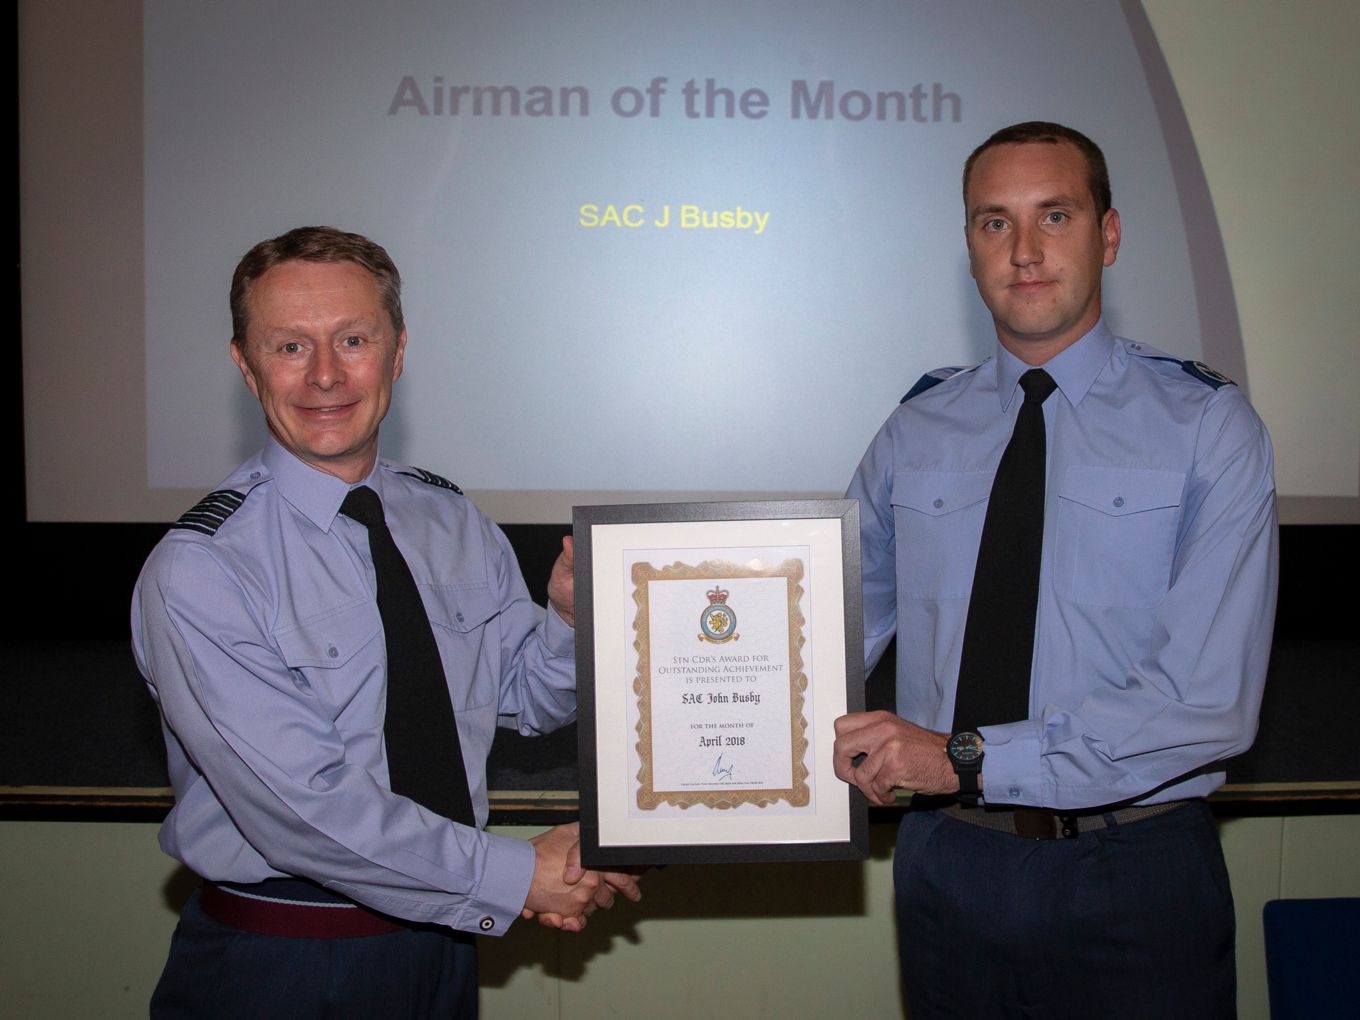 Airman of the month, SAC John Busby